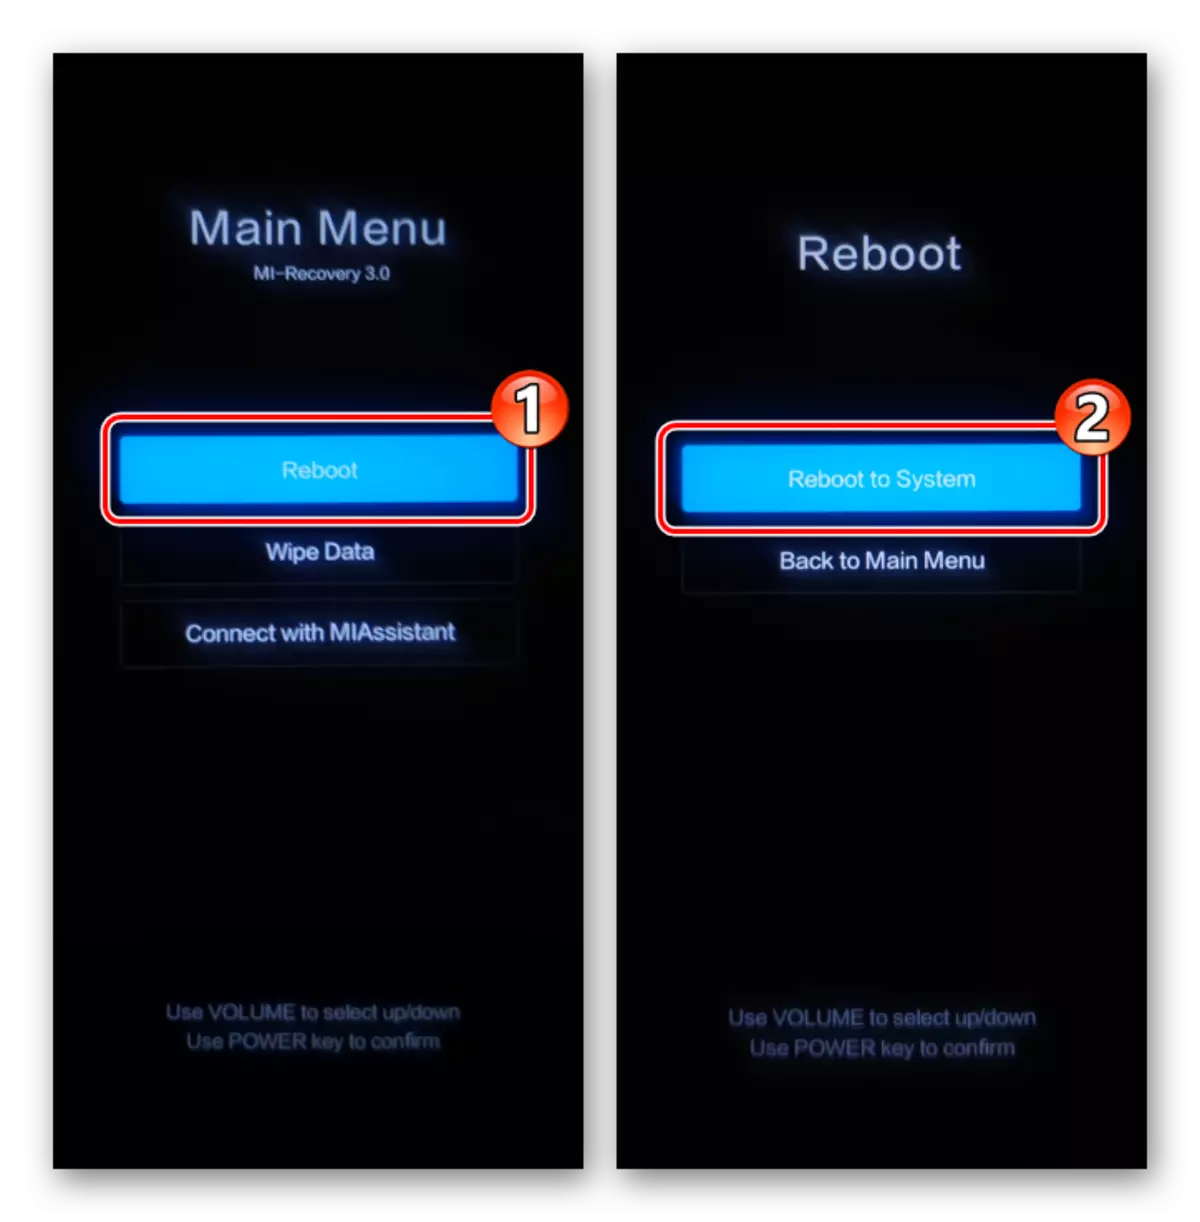 Xiaomi Miui Factory Recovery - Restart into the system using the Reboot function in Main Menu